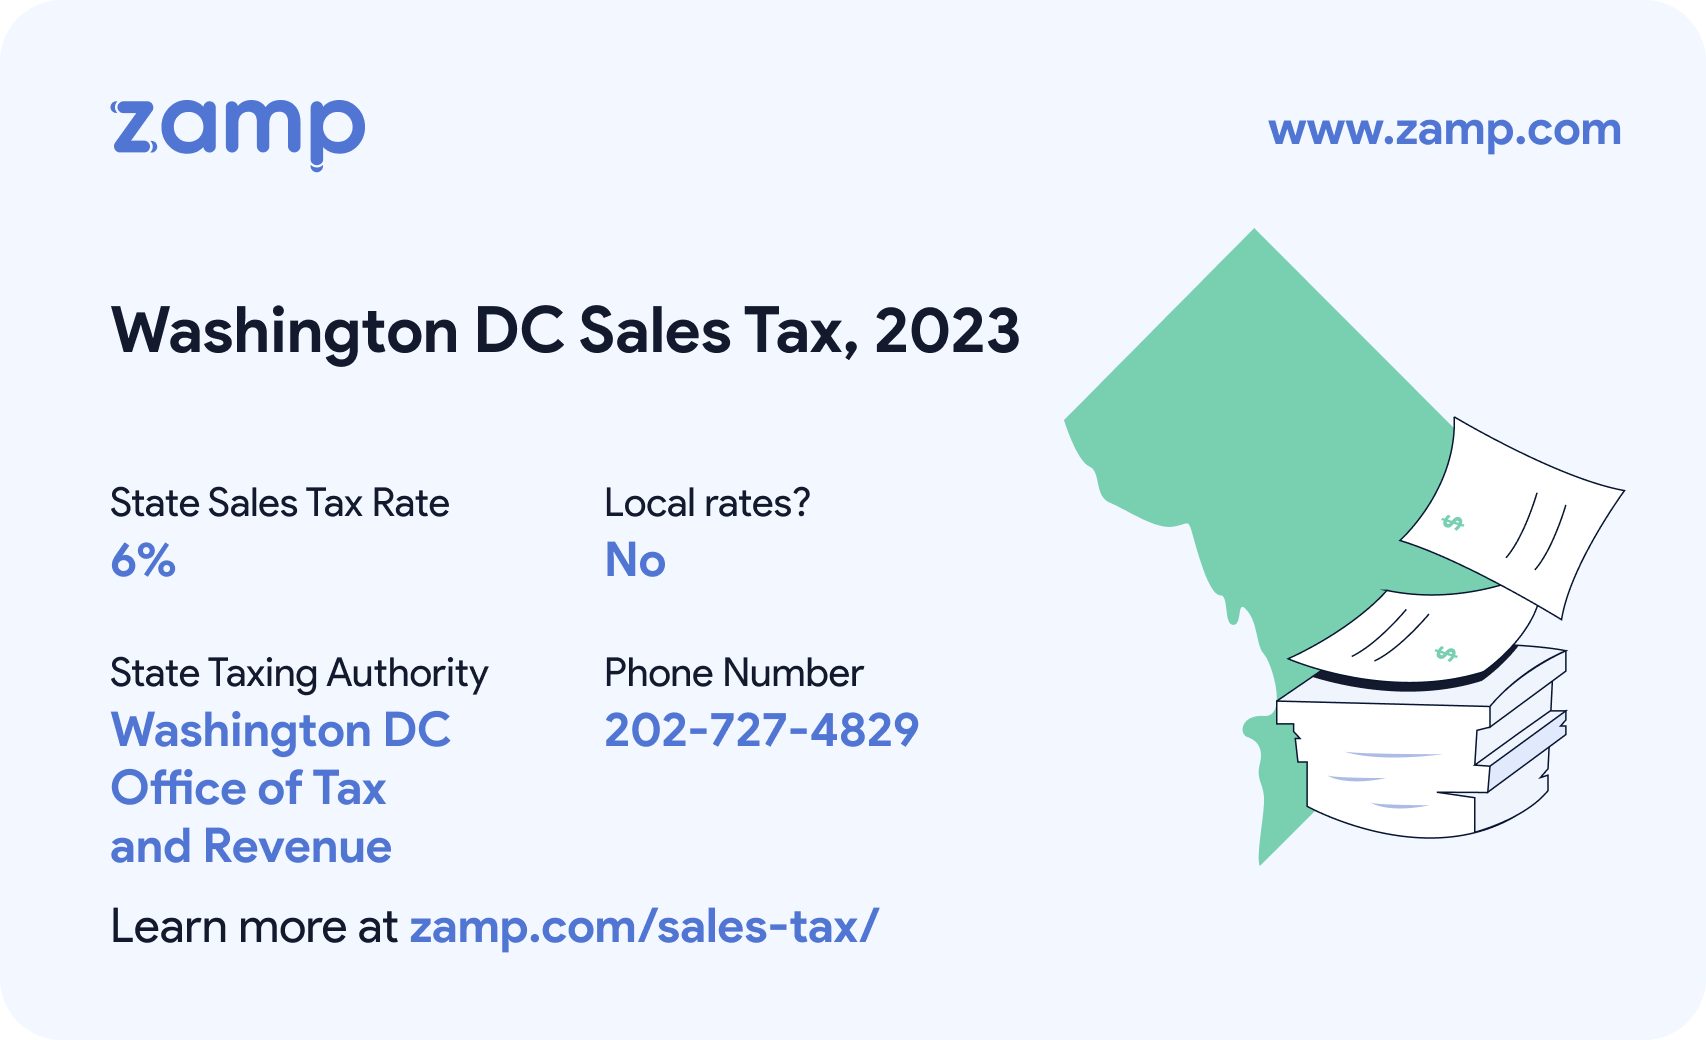 Washington DC basic sales tax info for 2023 - State sales tax rate: 6%, Local rates? No; State Taxing Authority: Washington DC Office of Tax and Revenue; and phone number 202-727-4829